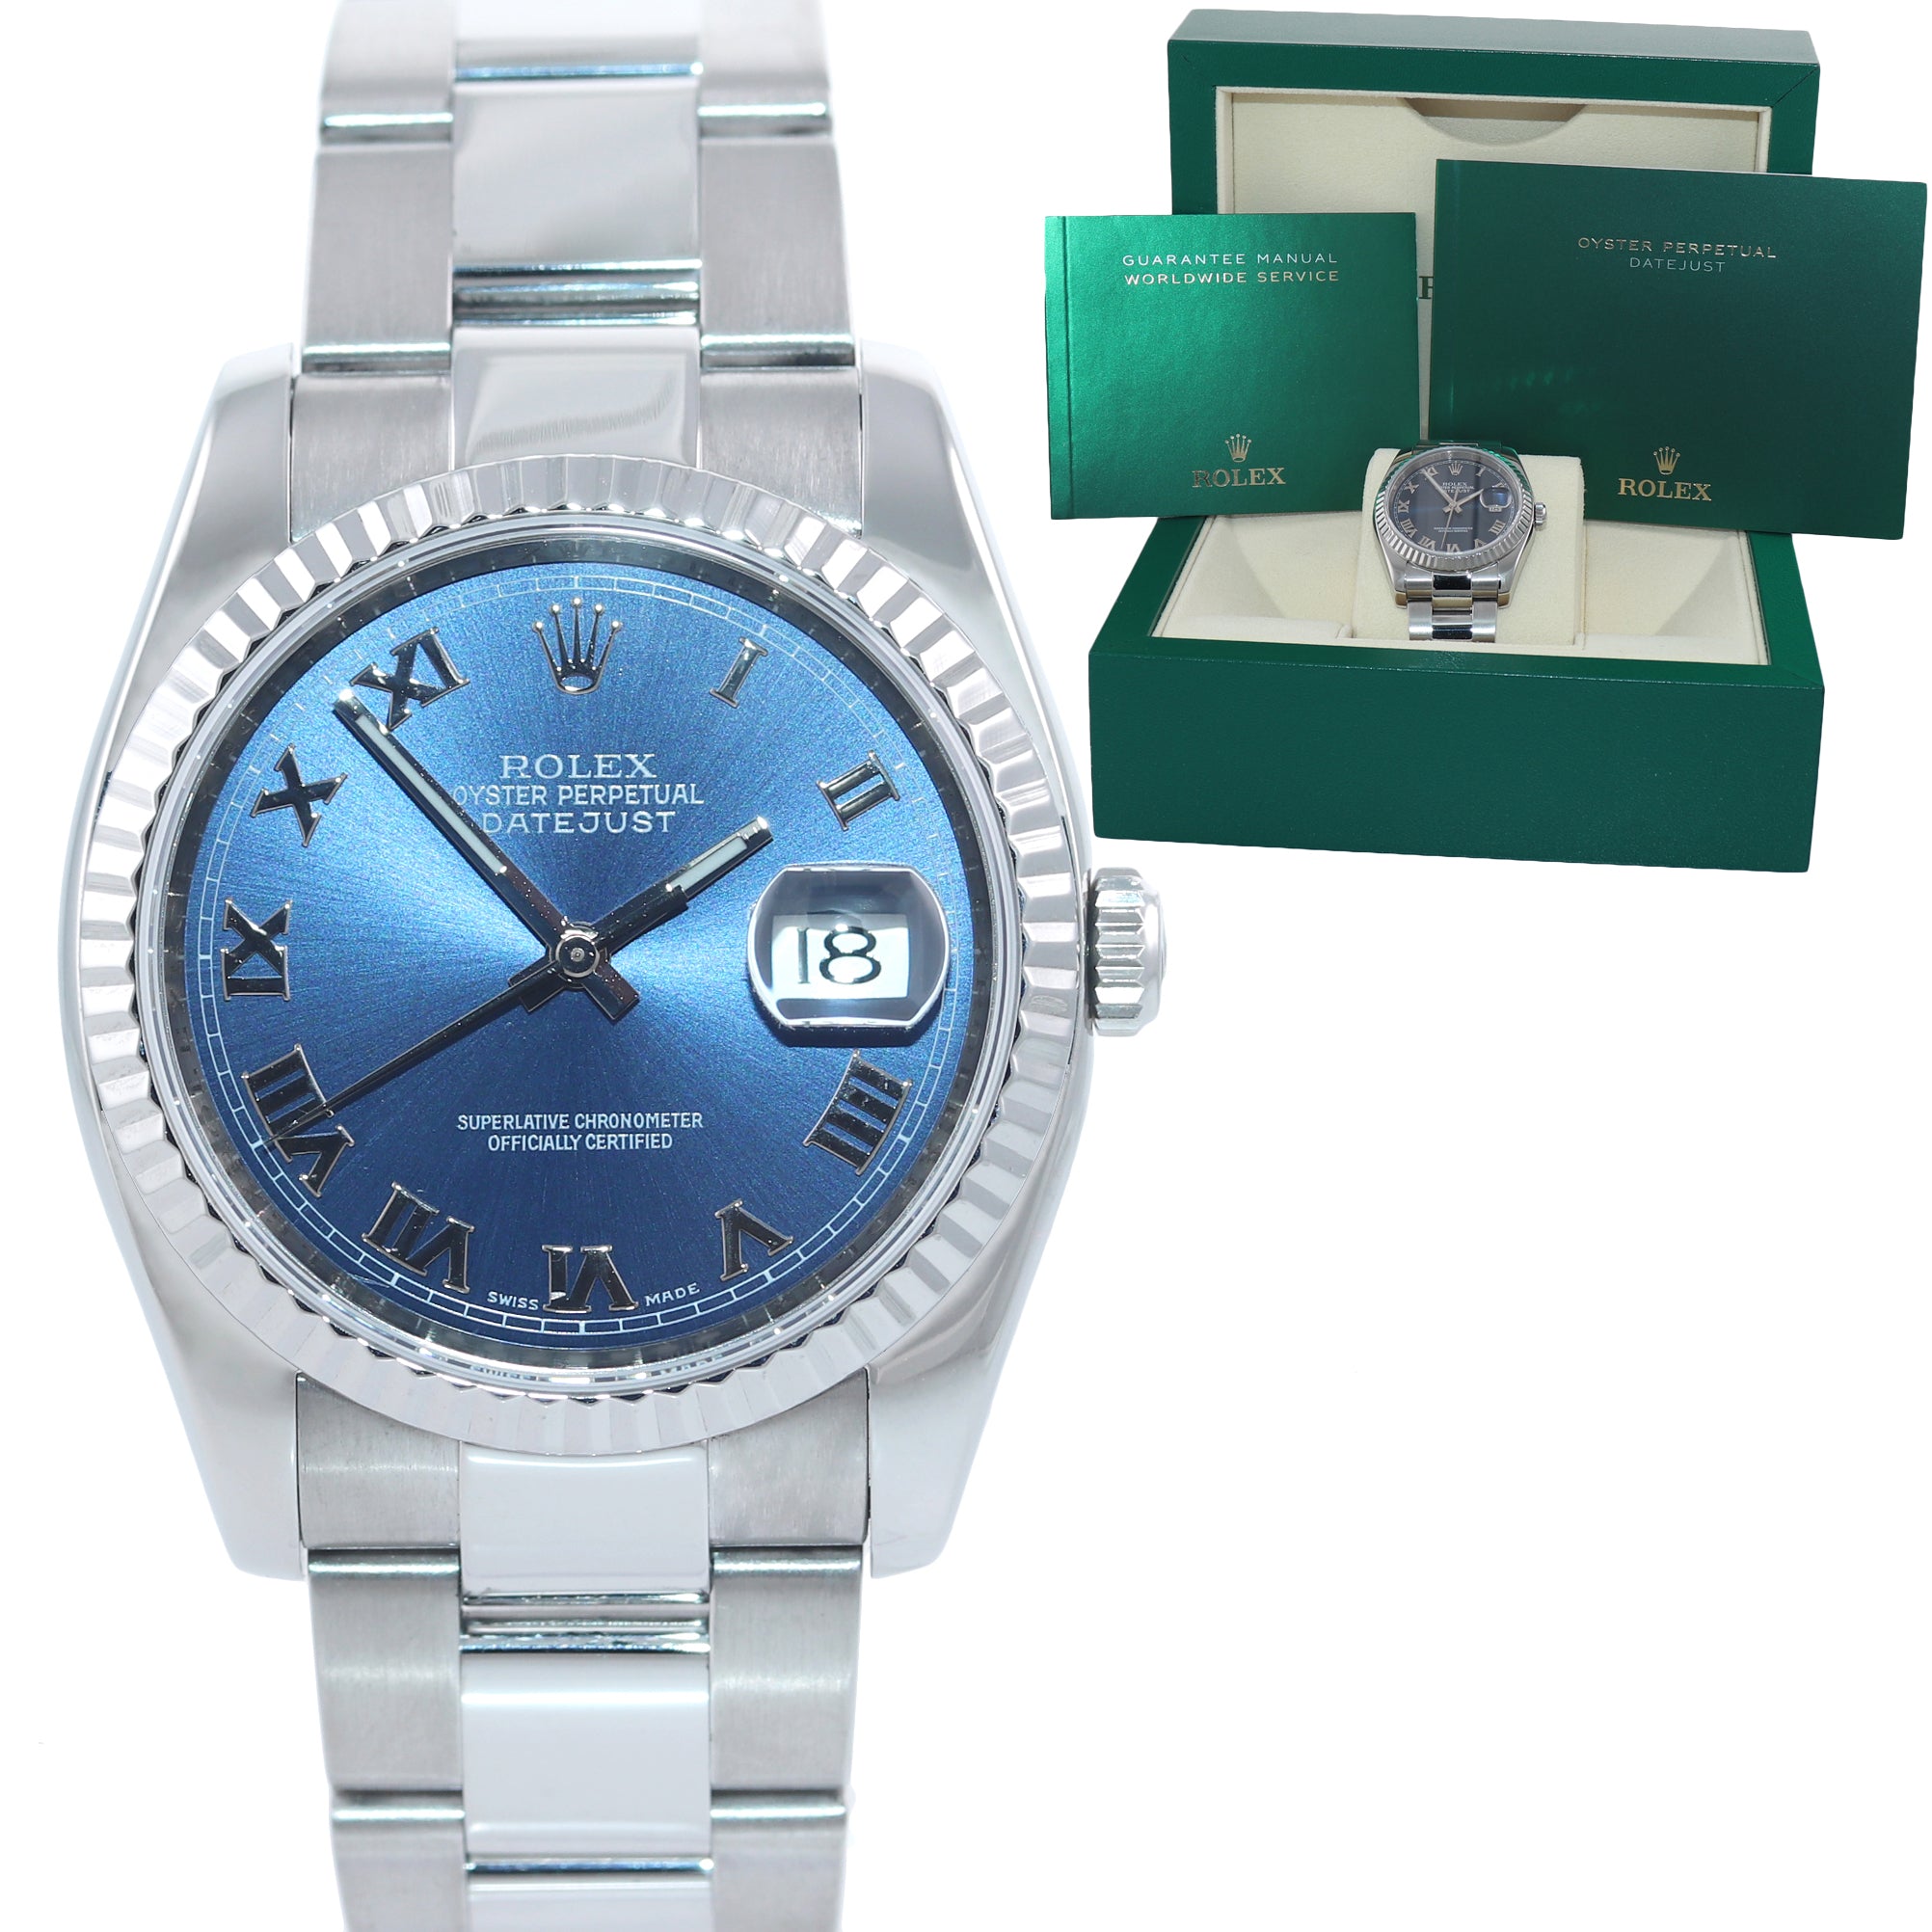 MINT Papers Rolex DateJust Steel Blue Roman Dial 116234 36mm Oyster Watch Box